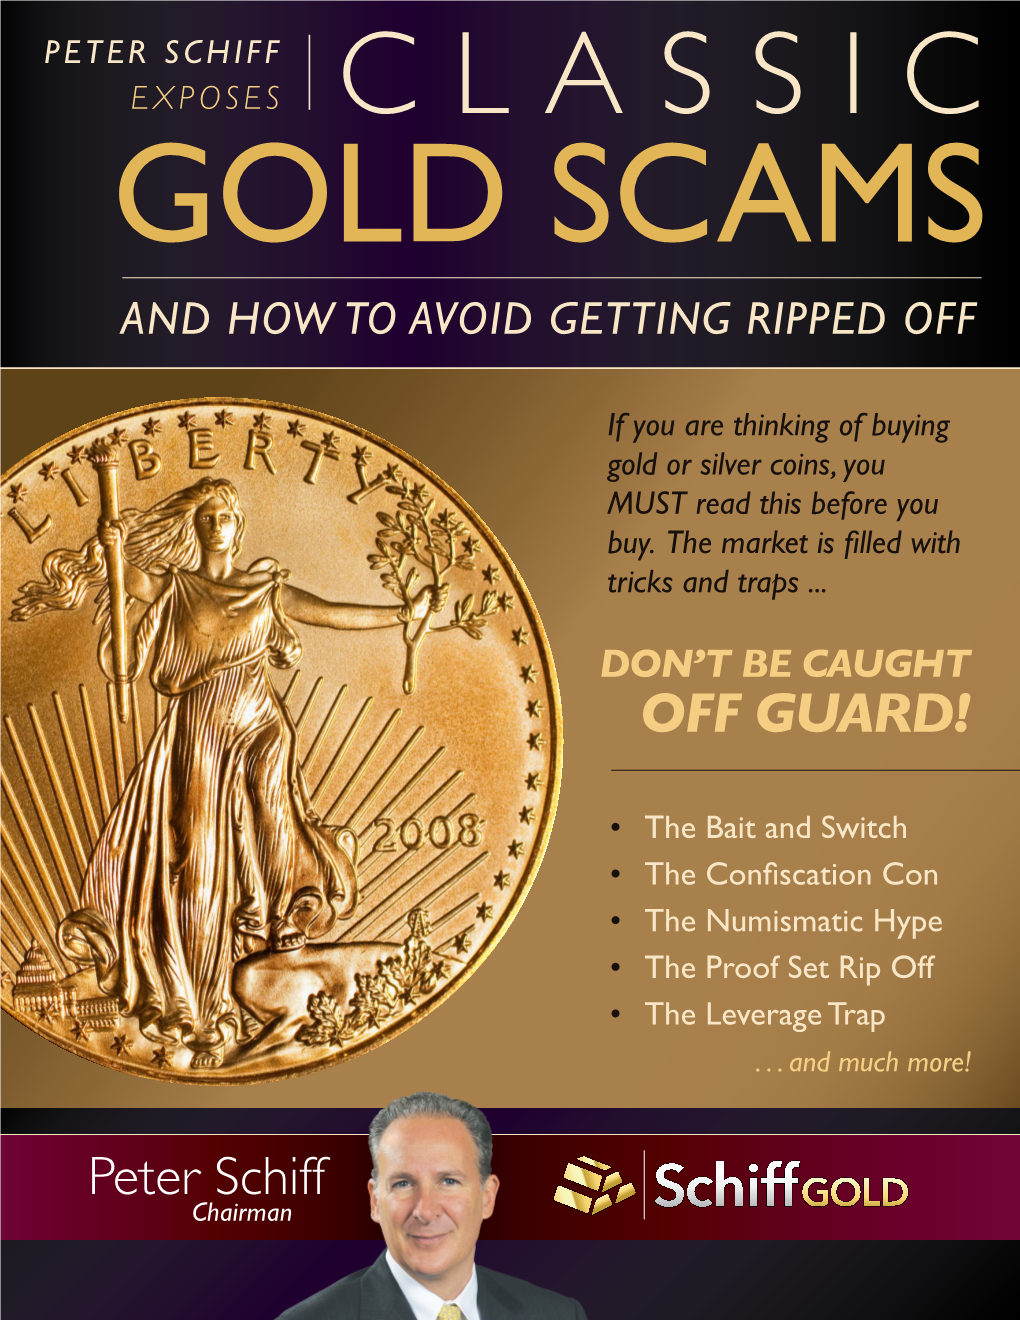 Peter Schiff Exposes Classic Gold Scams and How to Avoid Getting Ripped Off